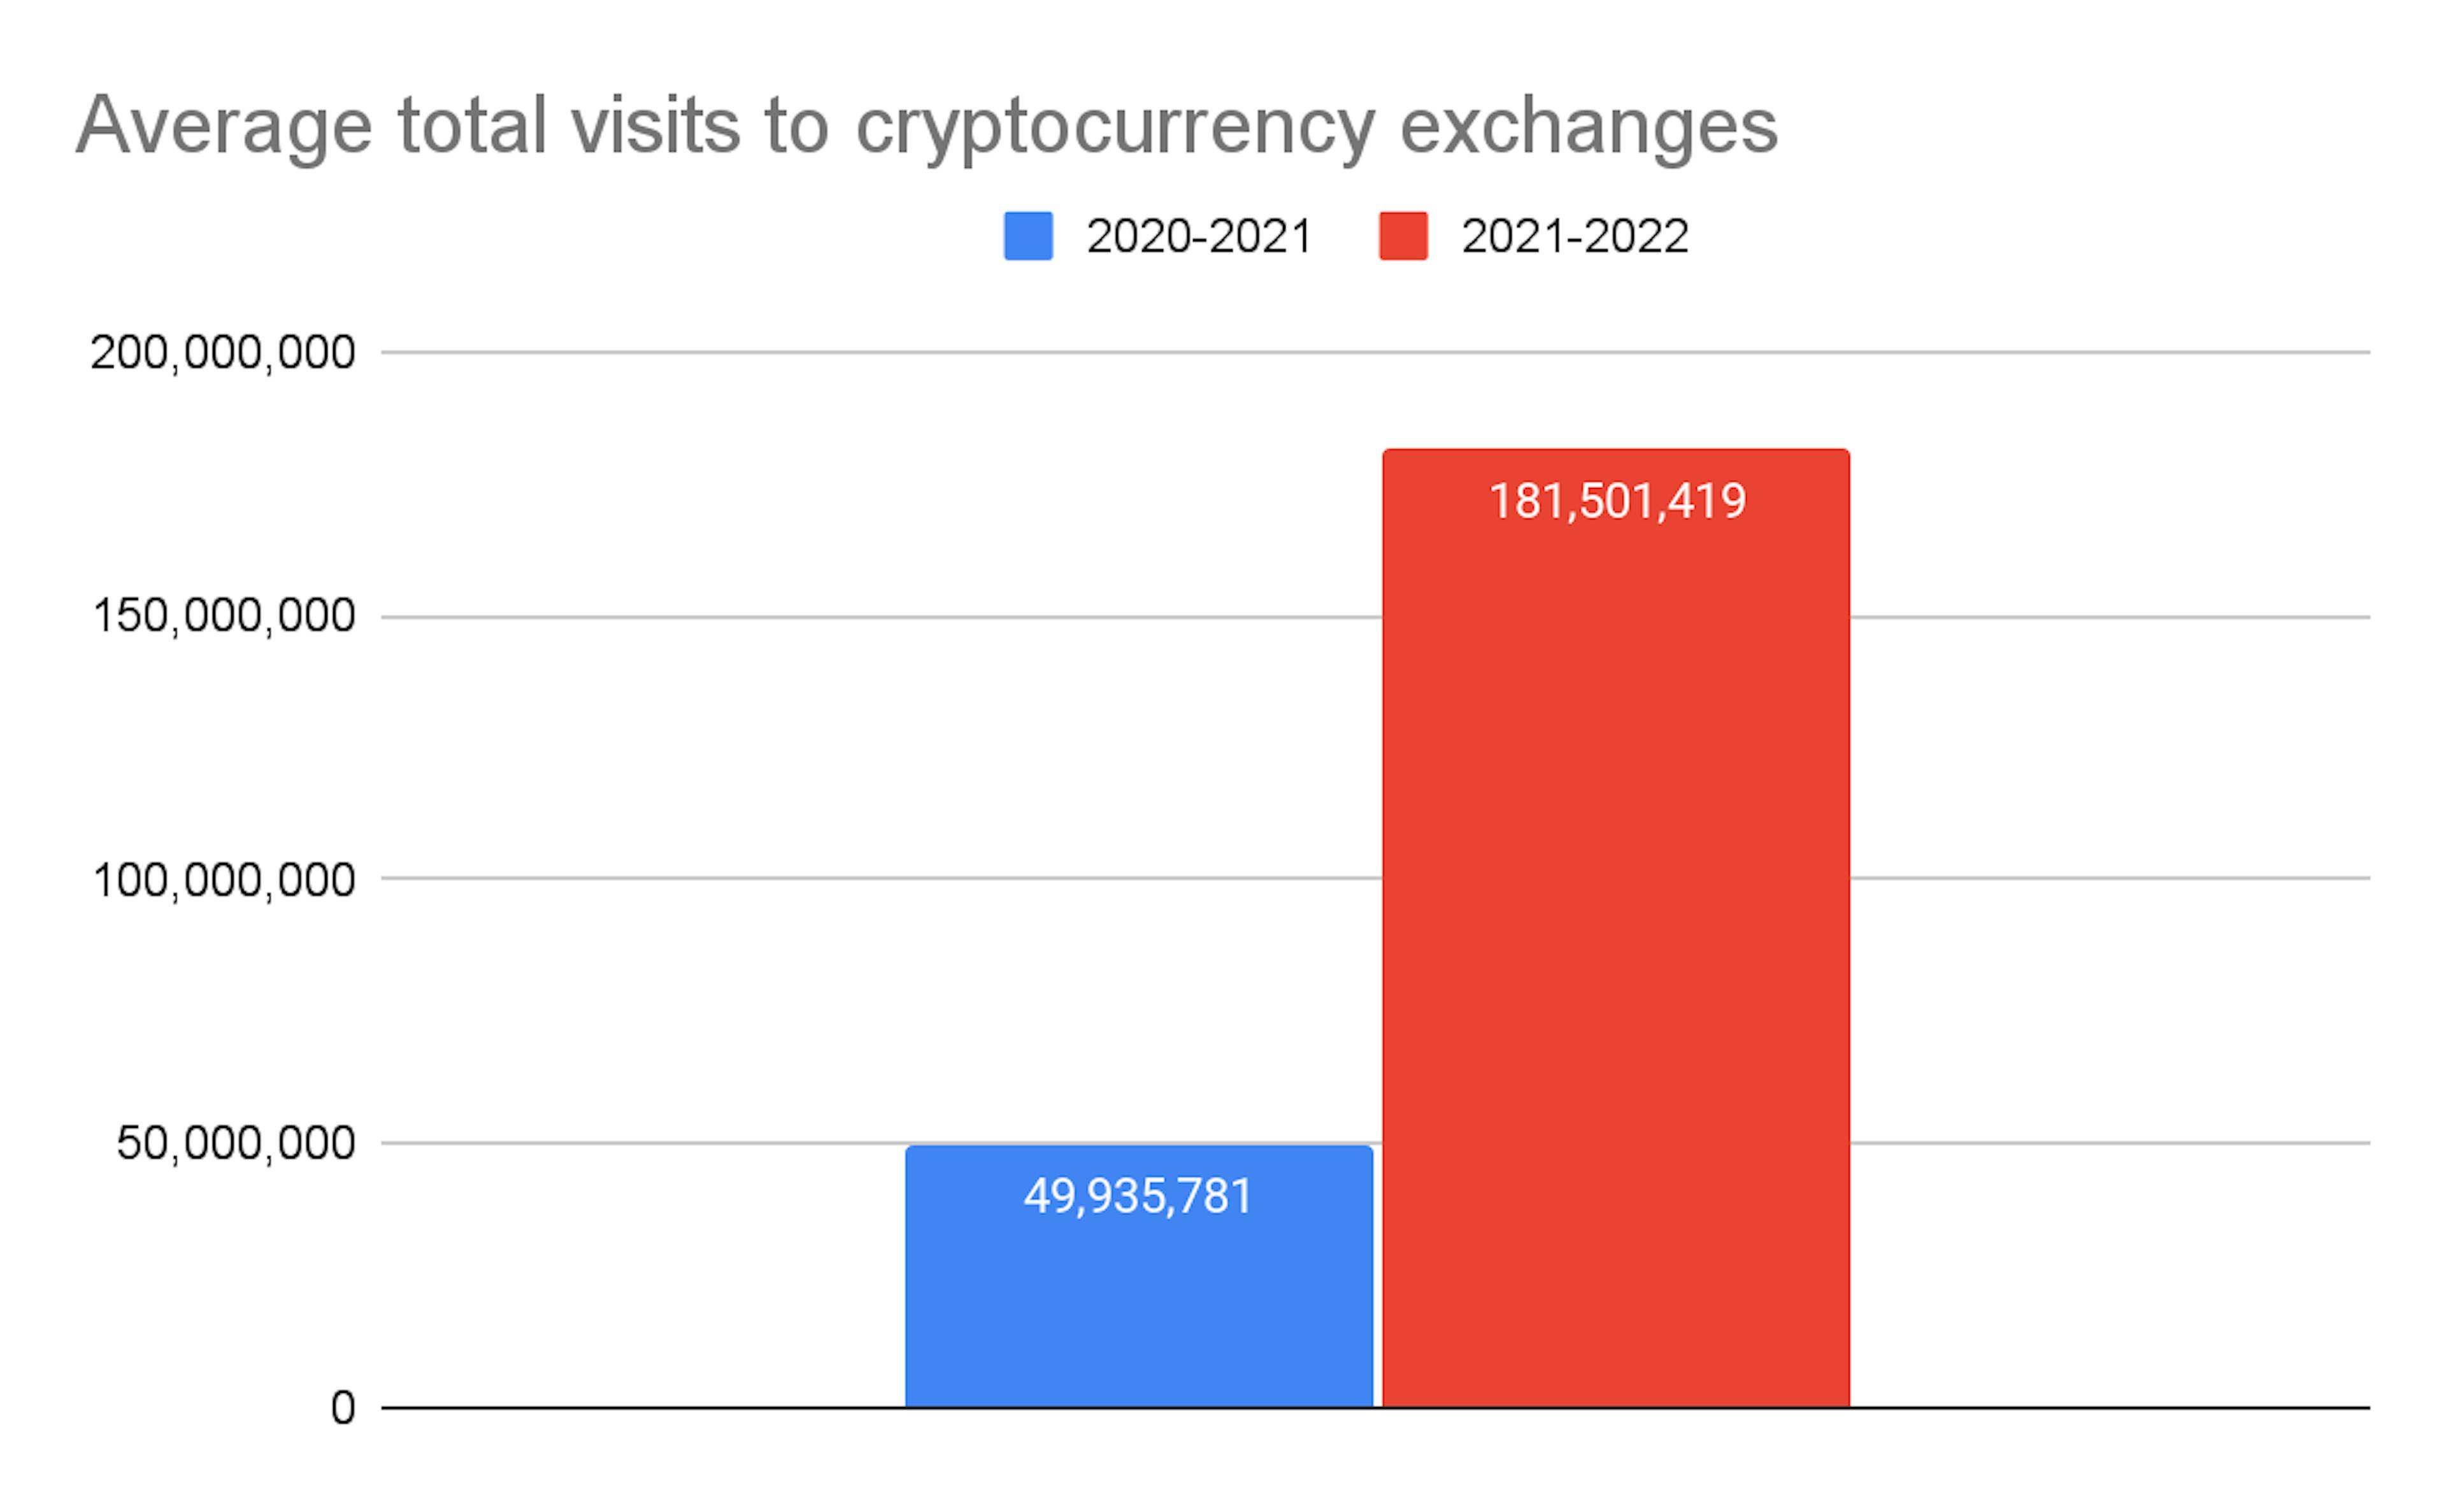 Average total visitors to cryptocurrency exchanges between 2020 and 2022